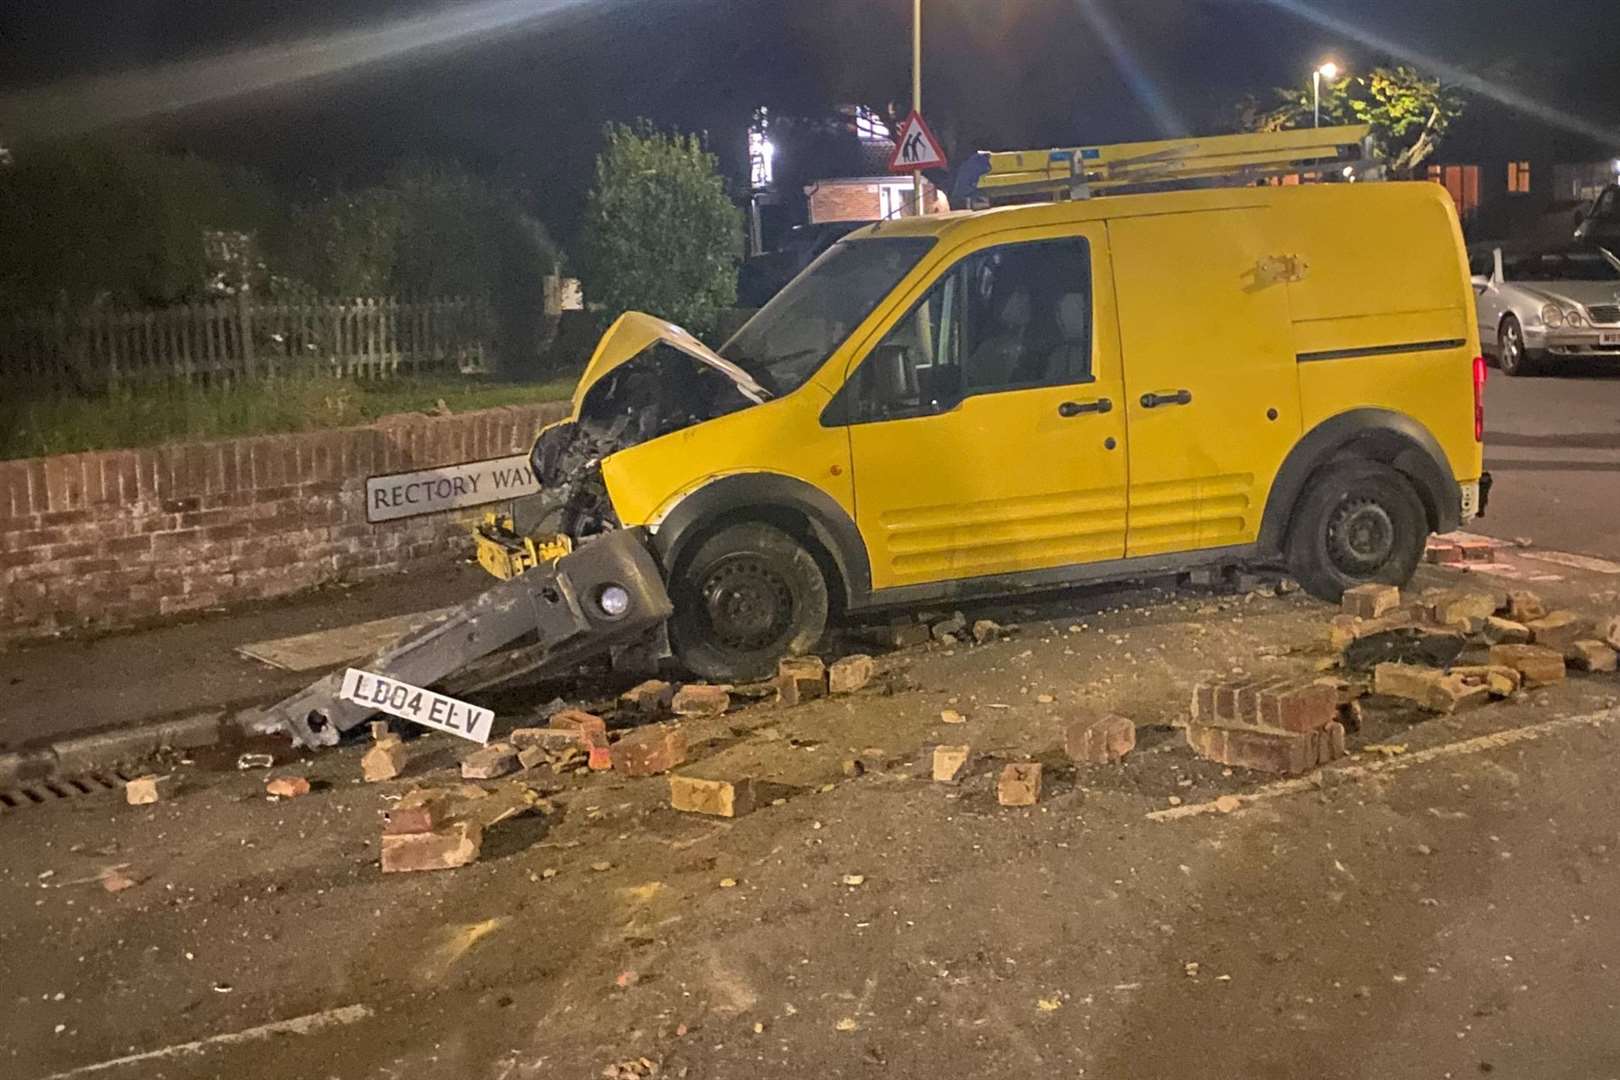 A van smashed into a wall in Kennington last night